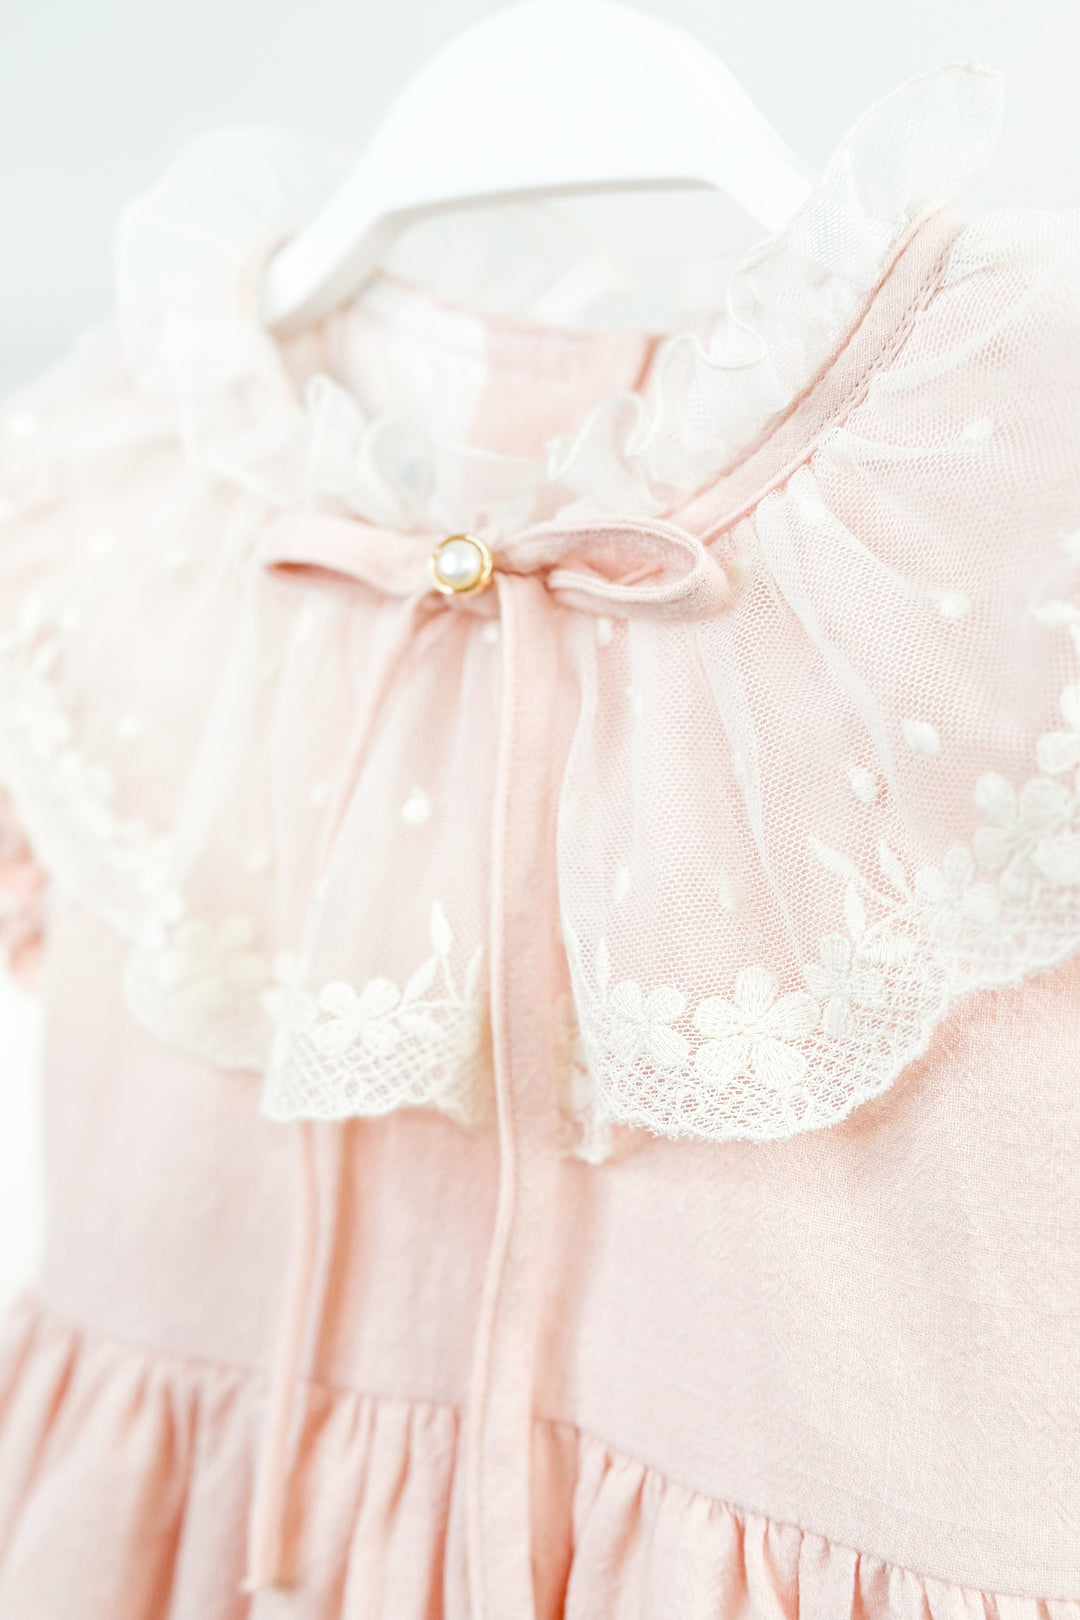 Fofettes "Arabella" Pink Lace Collar Dress | Millie and John